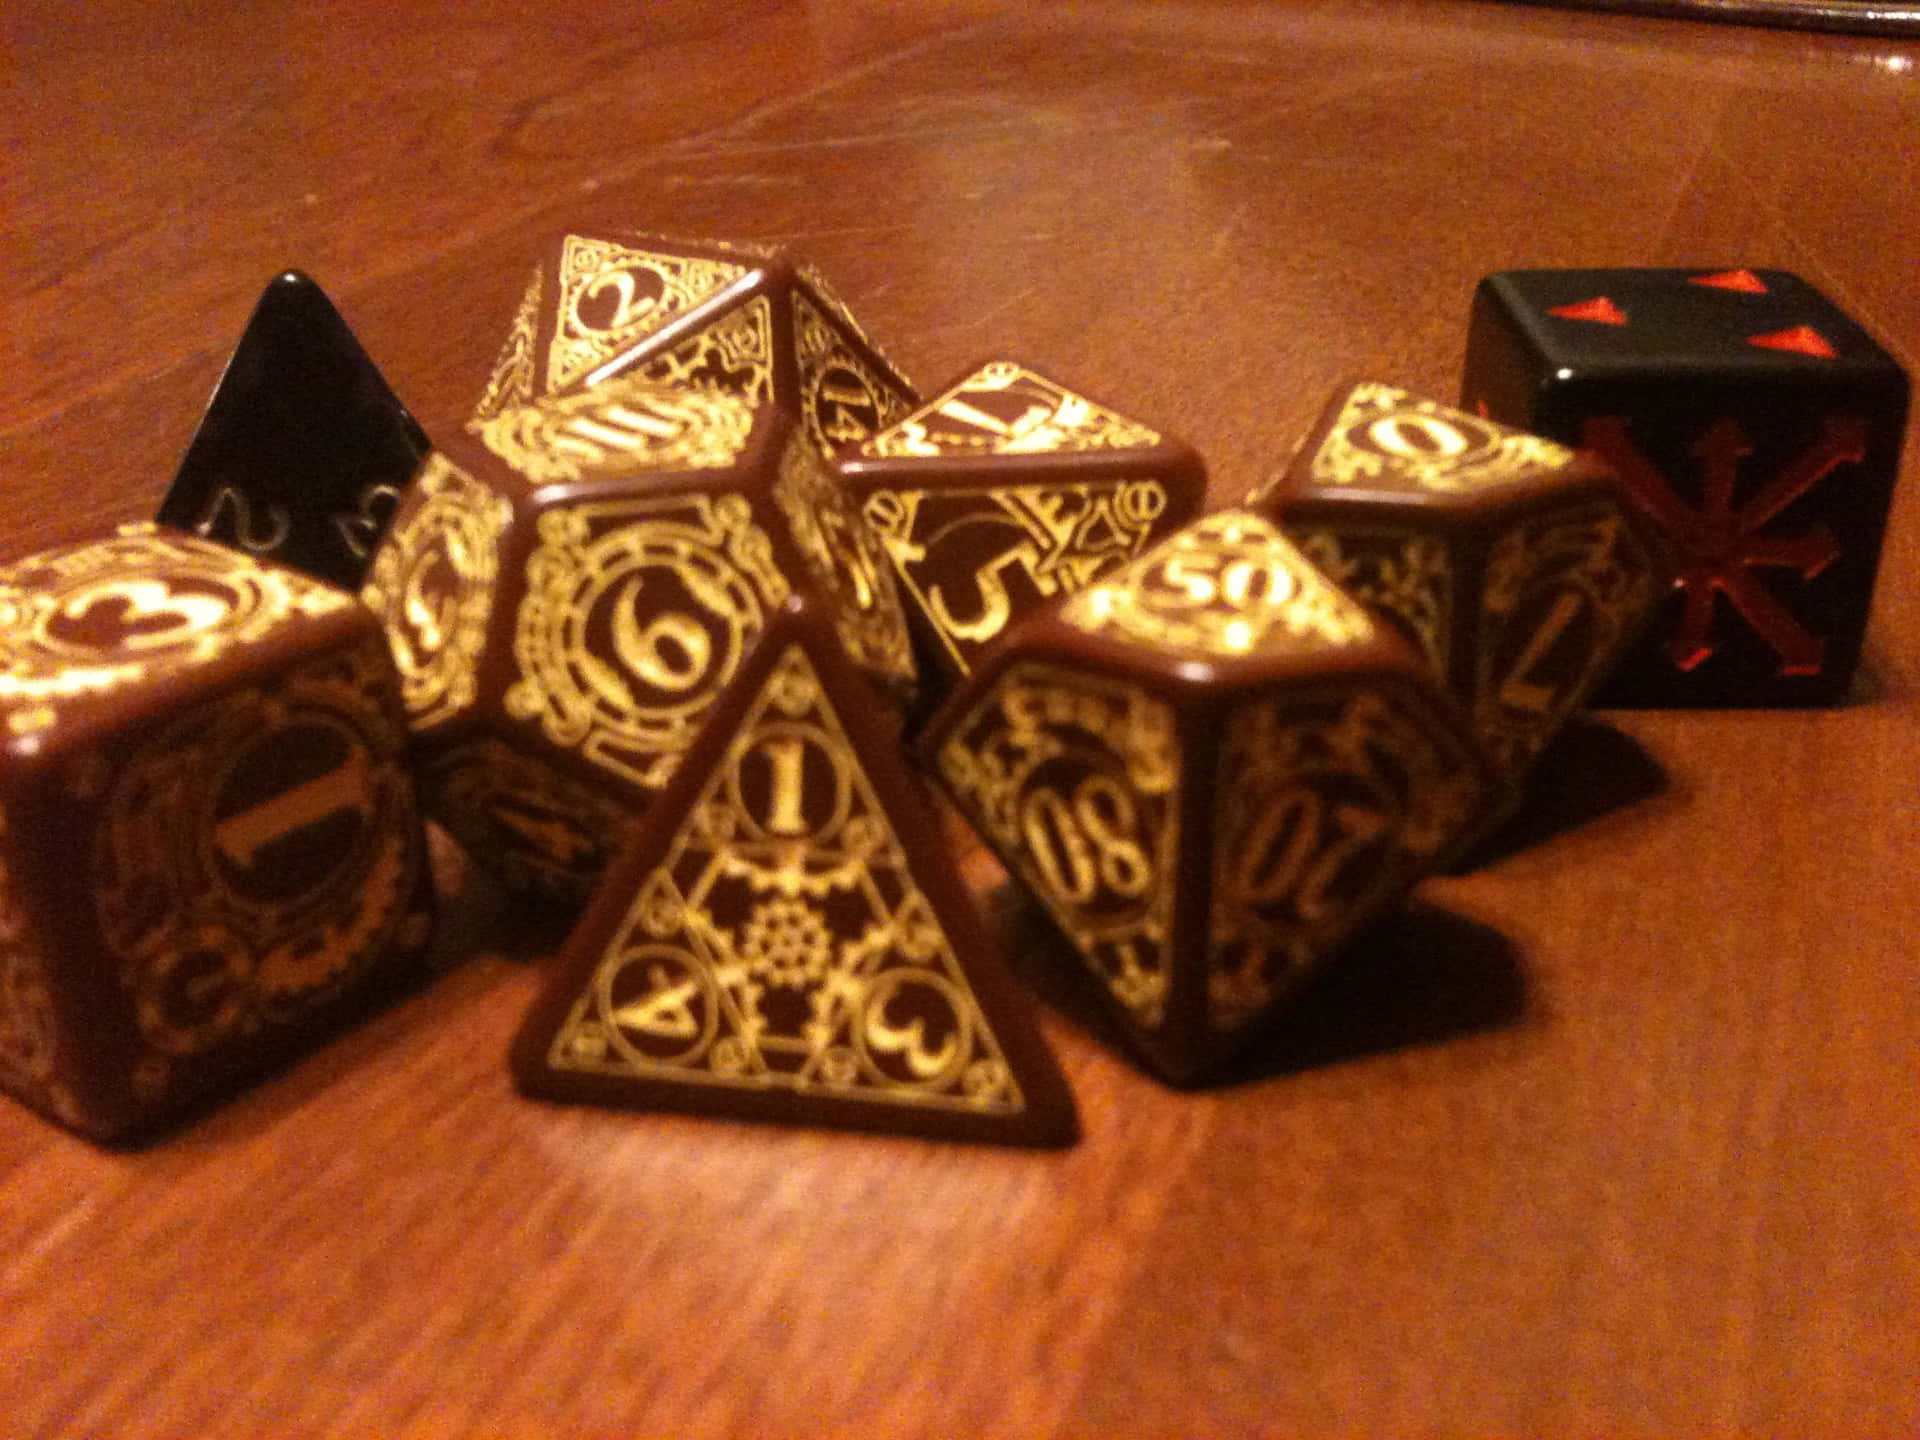 20 Sided Dice for a Perfect Roll Wallpaper